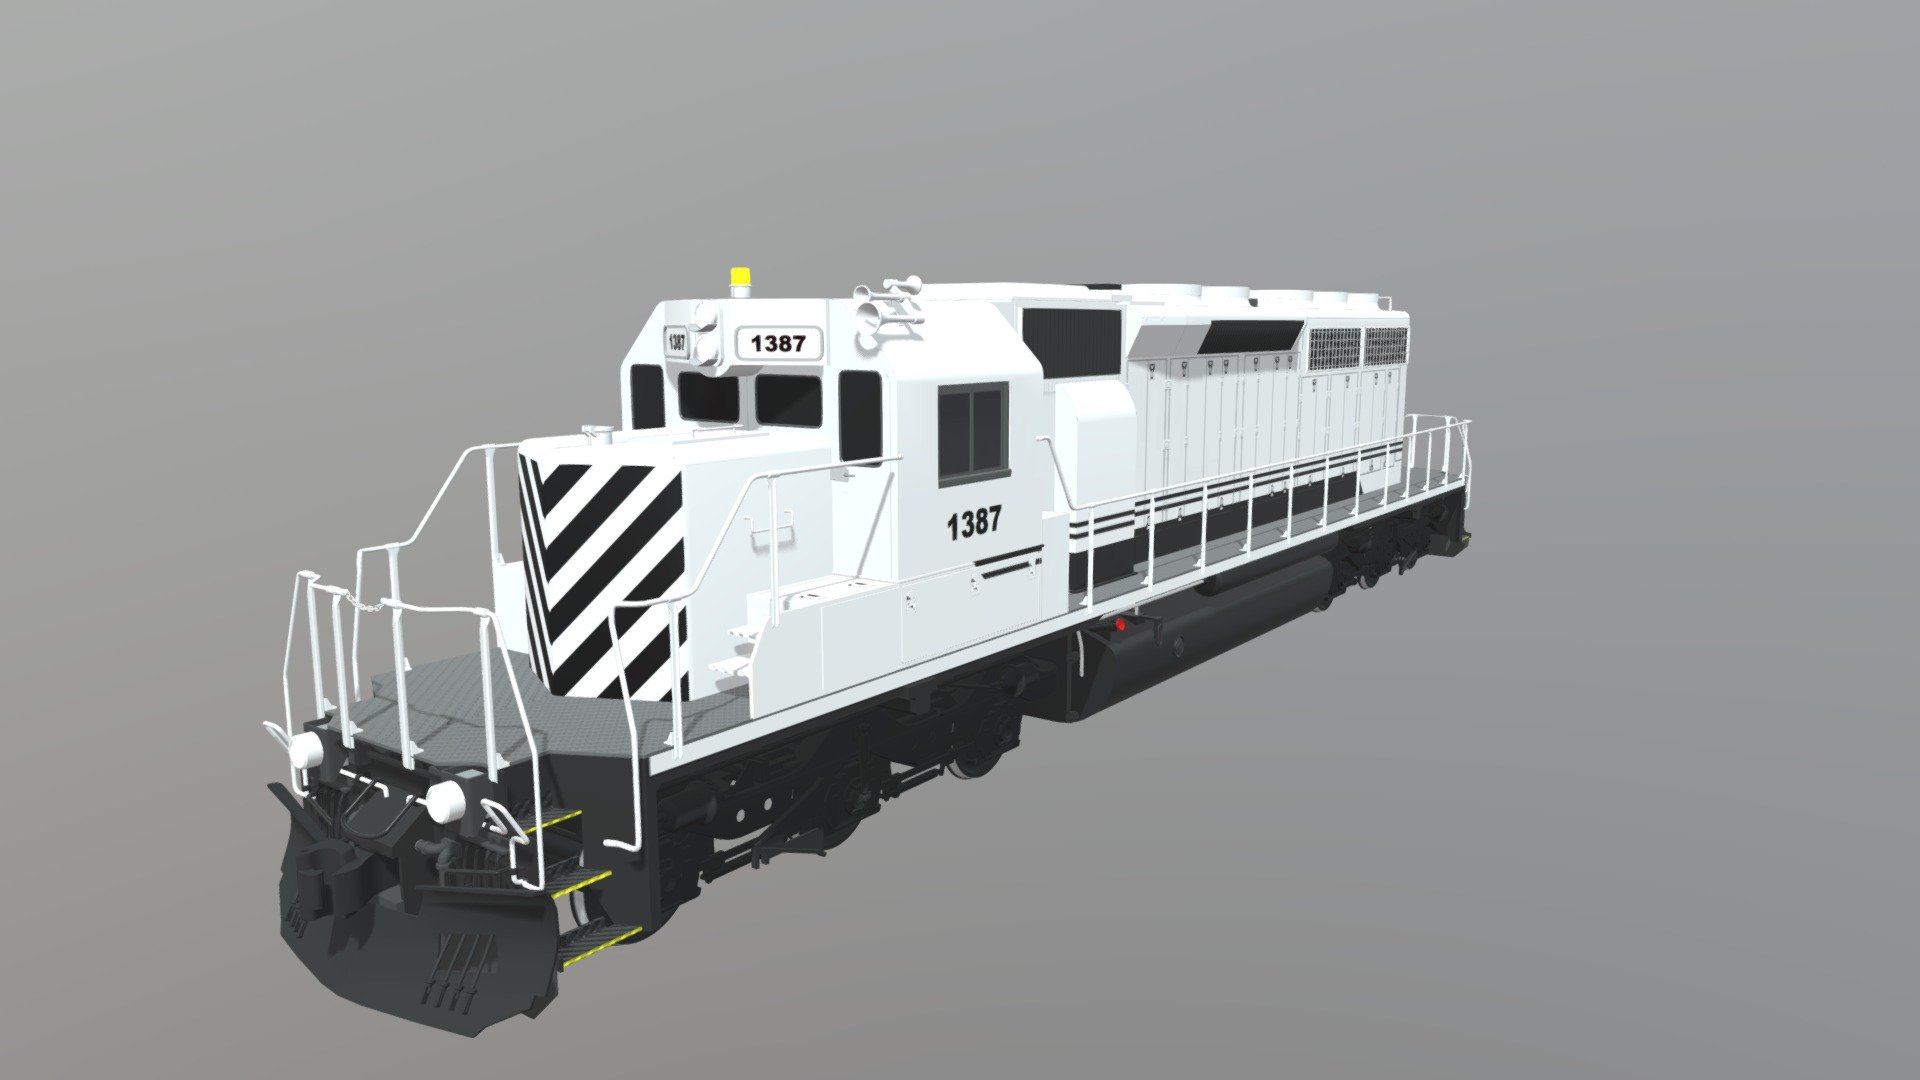 Modelling was done entirely in Blender.

Texturing was done in Blender and Microsoft Paint.

This was already posted on r/Blender in Reddit. The post is here;

https://www.reddit.com/r/blender/comments/pic87s/emd_sd40_diesel_locomotive_that_i_modelled_myself/

Feel free to download, use, and/or edit it yourself! - EMD-SD40 Diesel Electric Locomotive - Download Free 3D model by Heataker 3d model